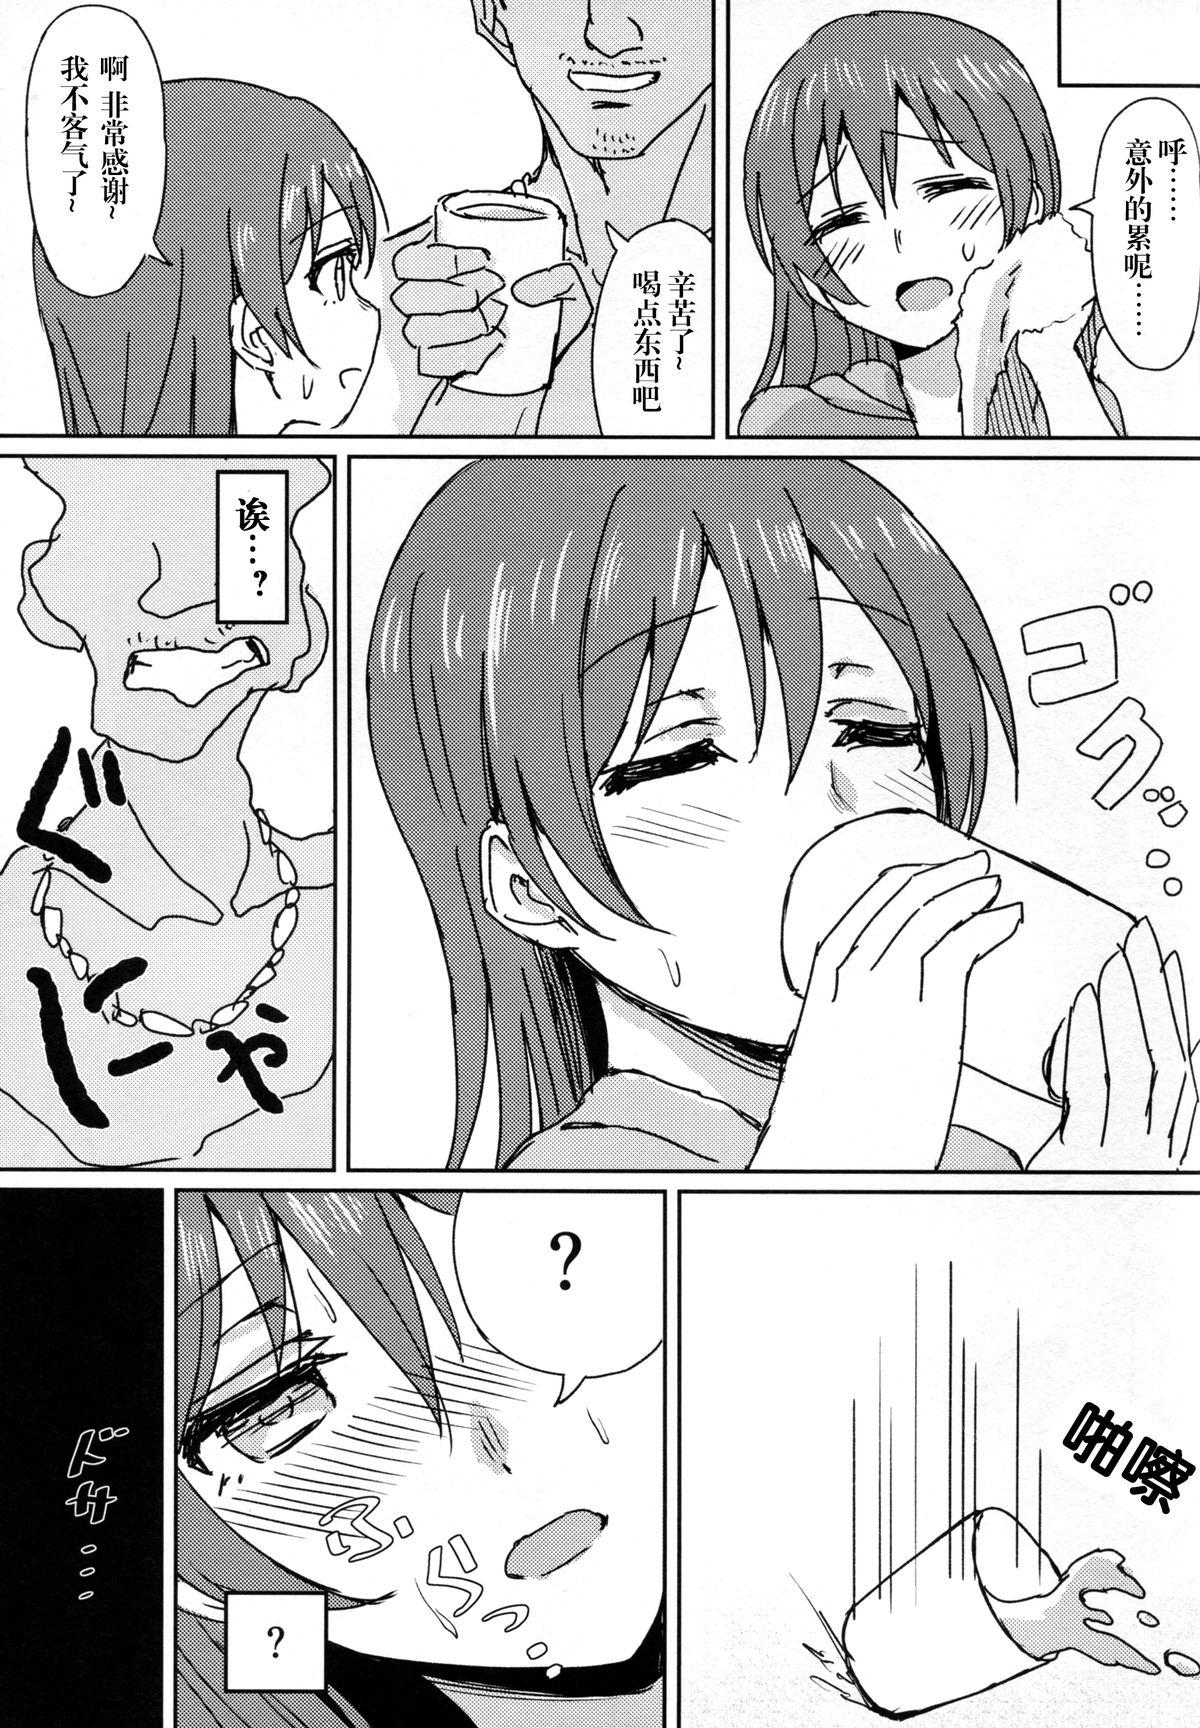 Bhabhi Hah,Wrench This! - Love live Best Blowjob - Page 10